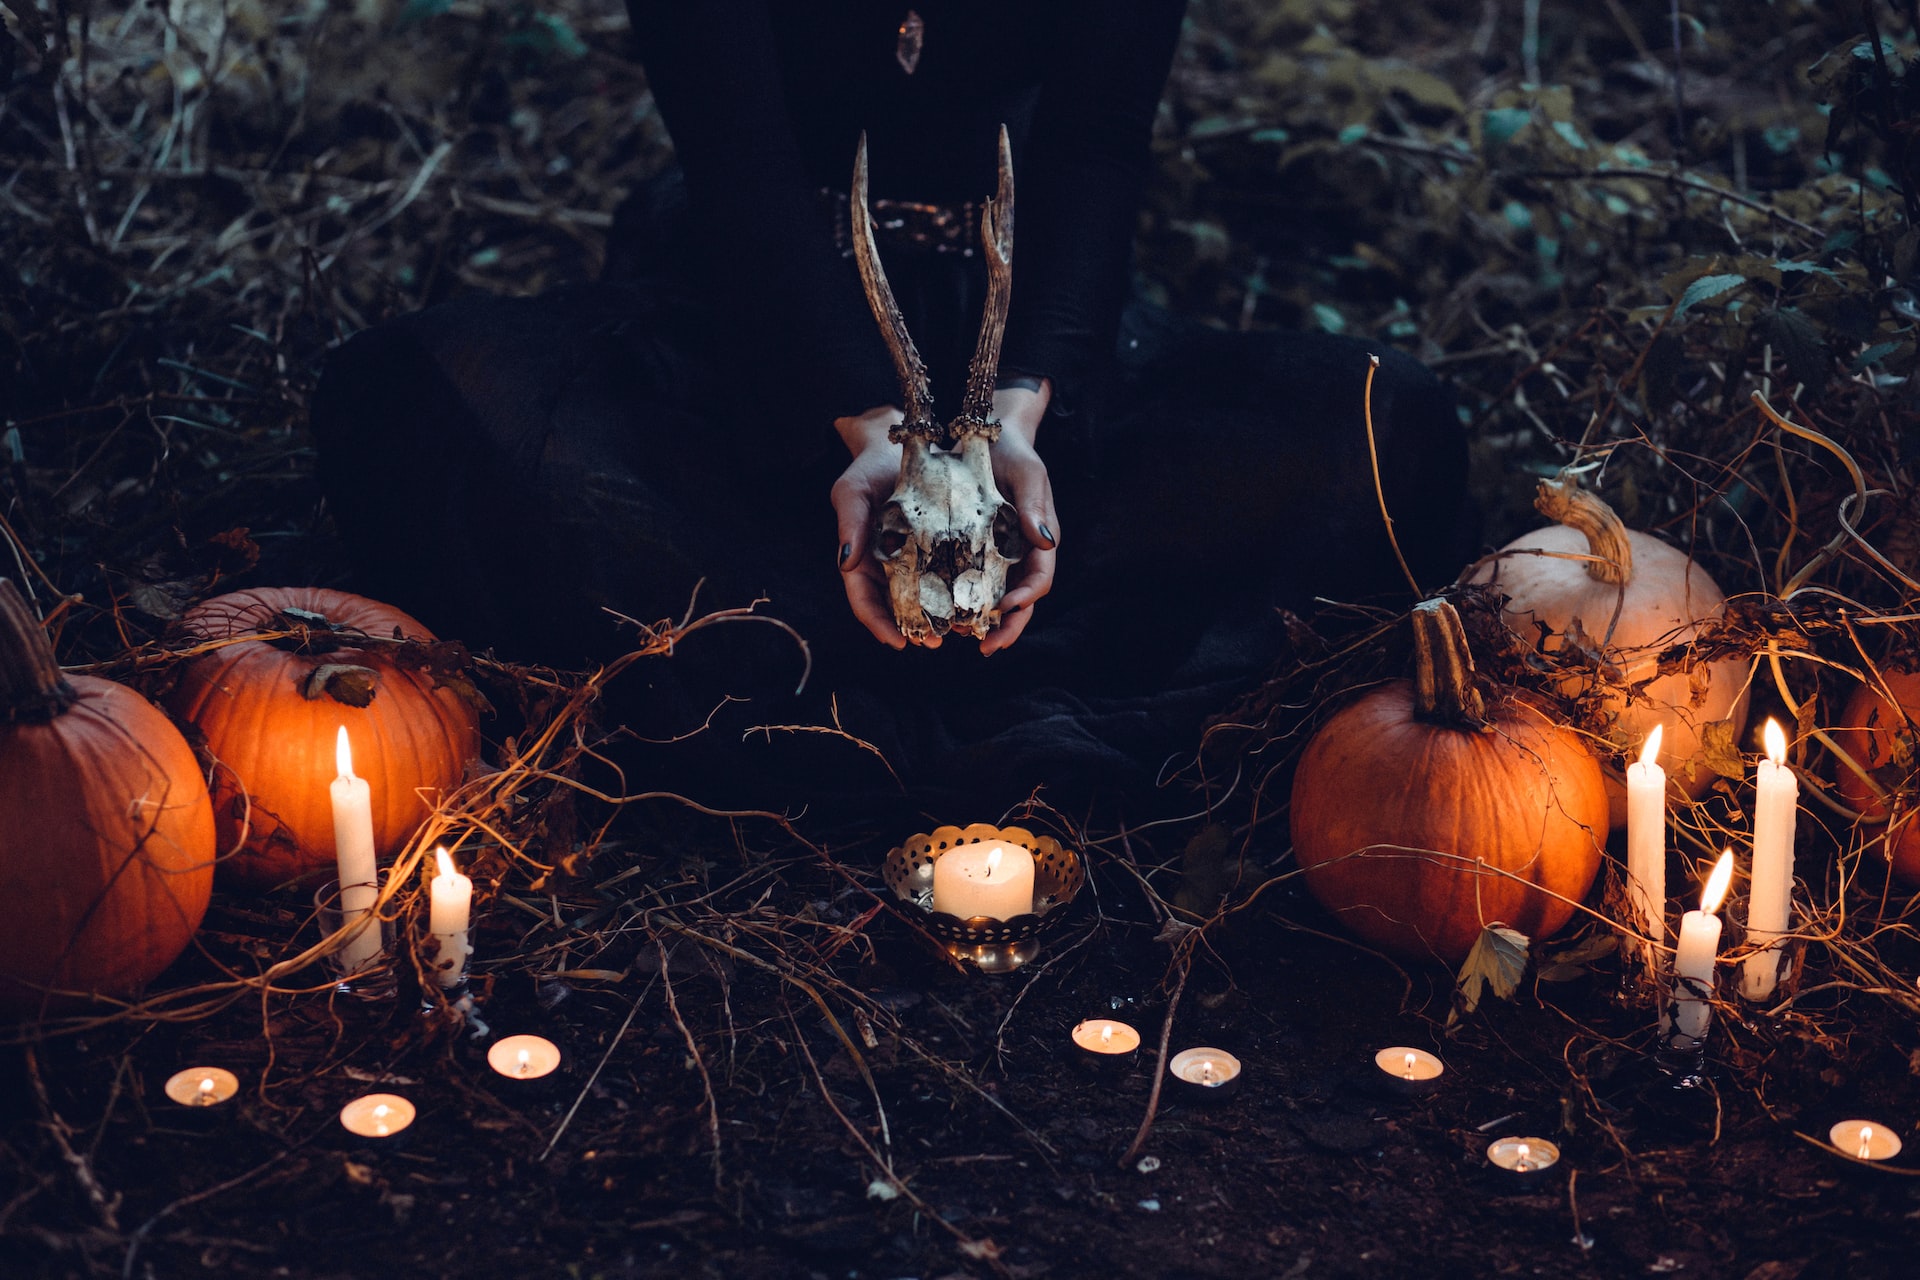 A person holding a cattle skull surrounded by squash and candles